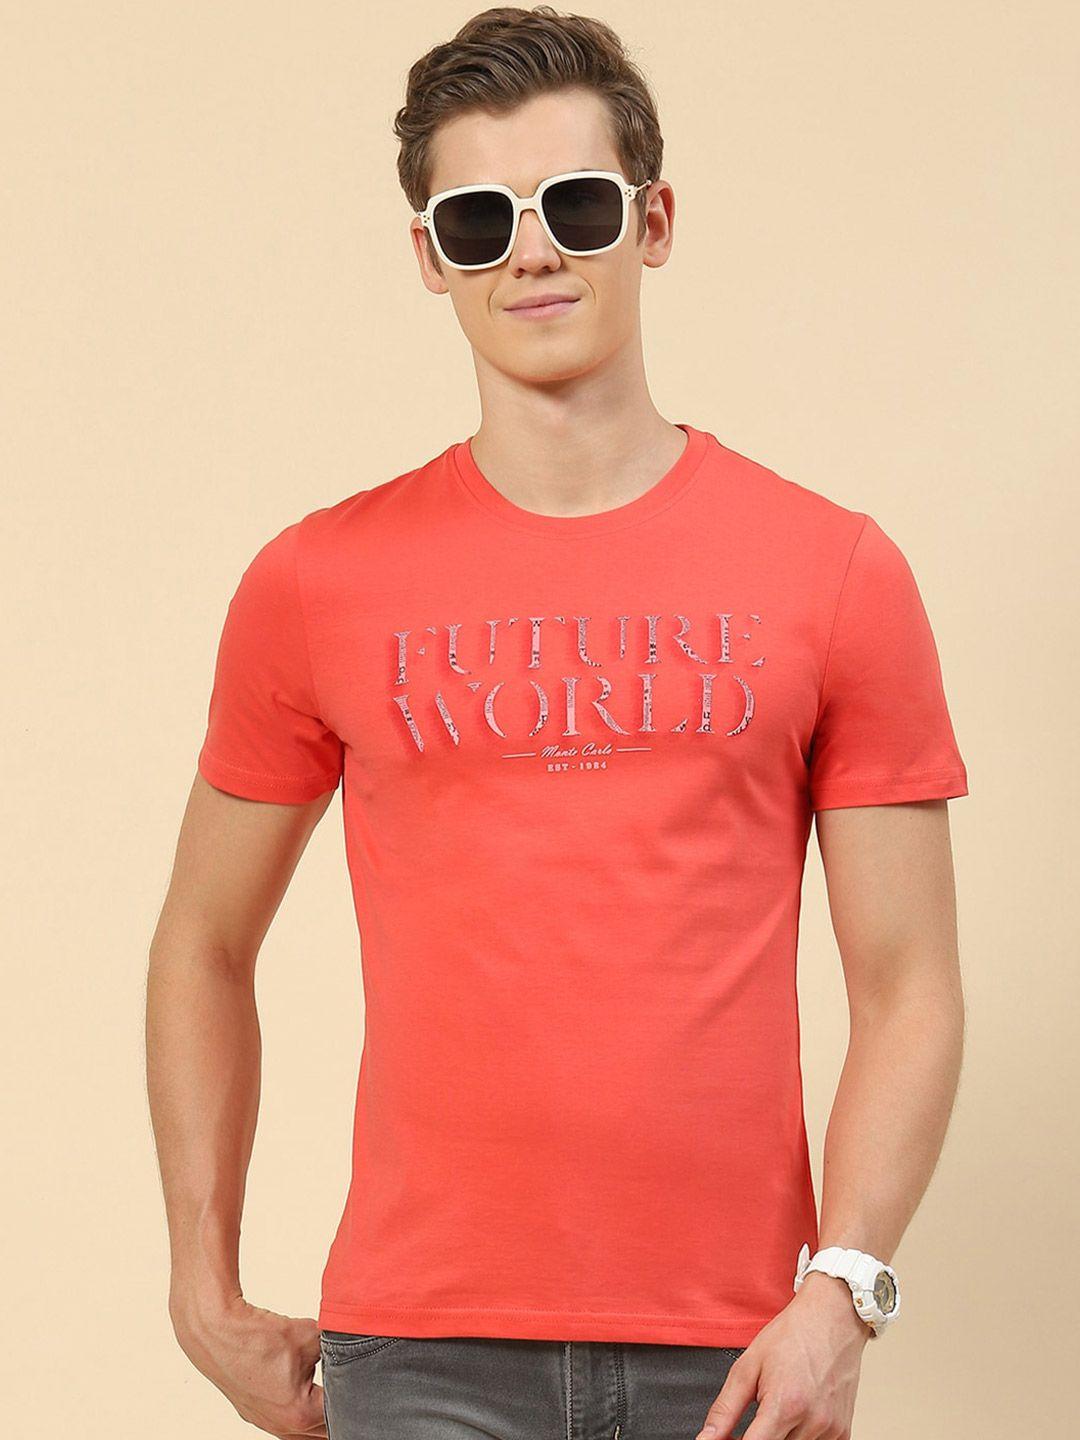 monte carlo typography printed t-shirt